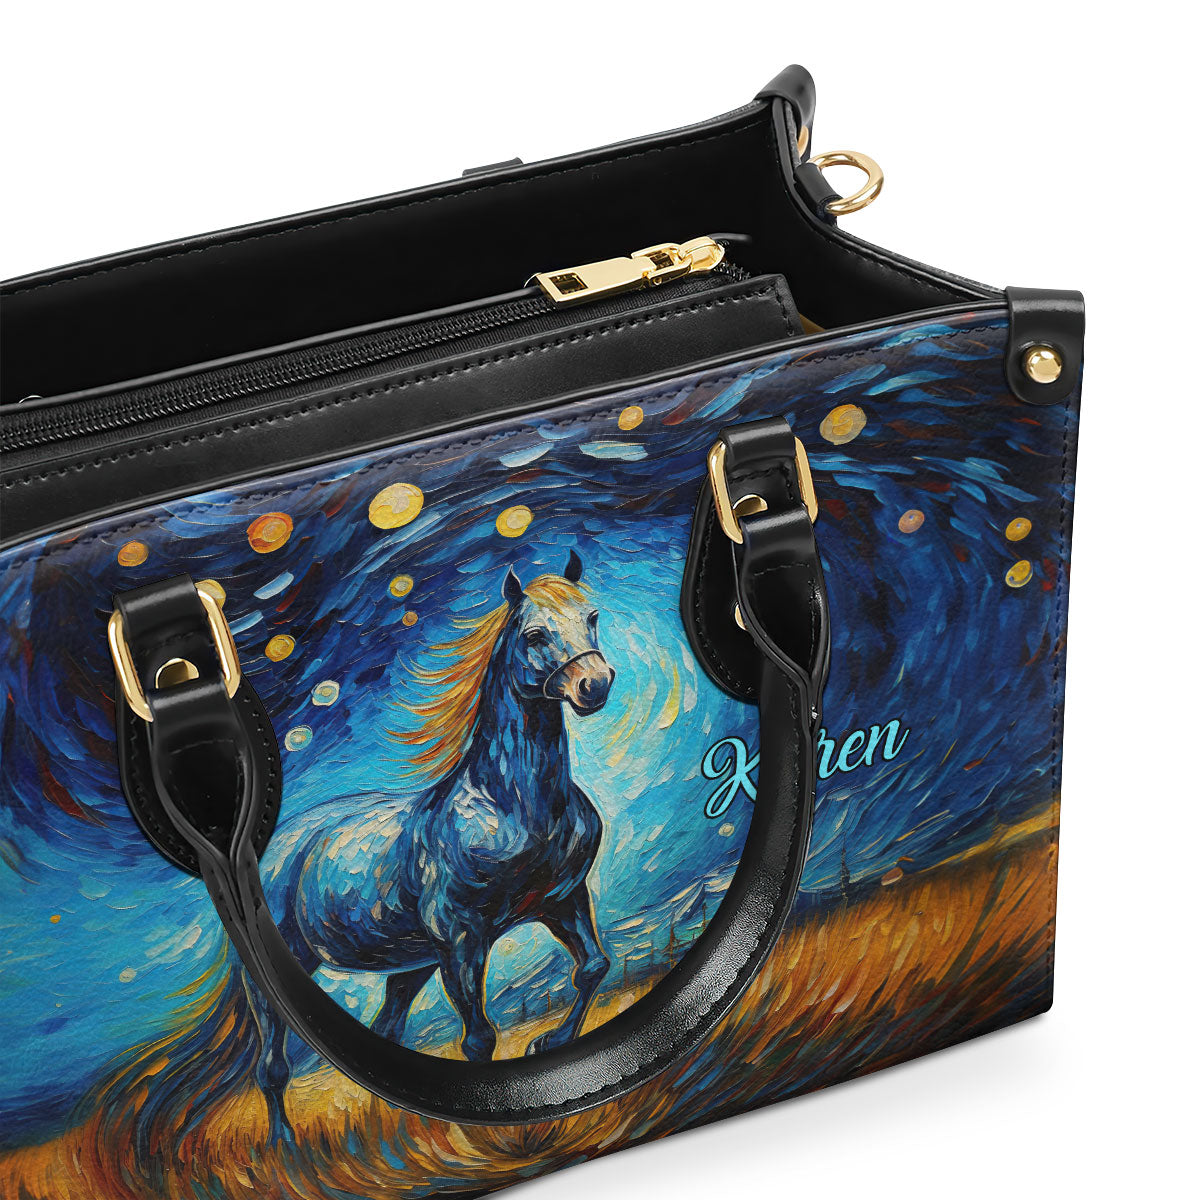 Horse In The Starry Night Style - Personalized Leather Handbag MSM14